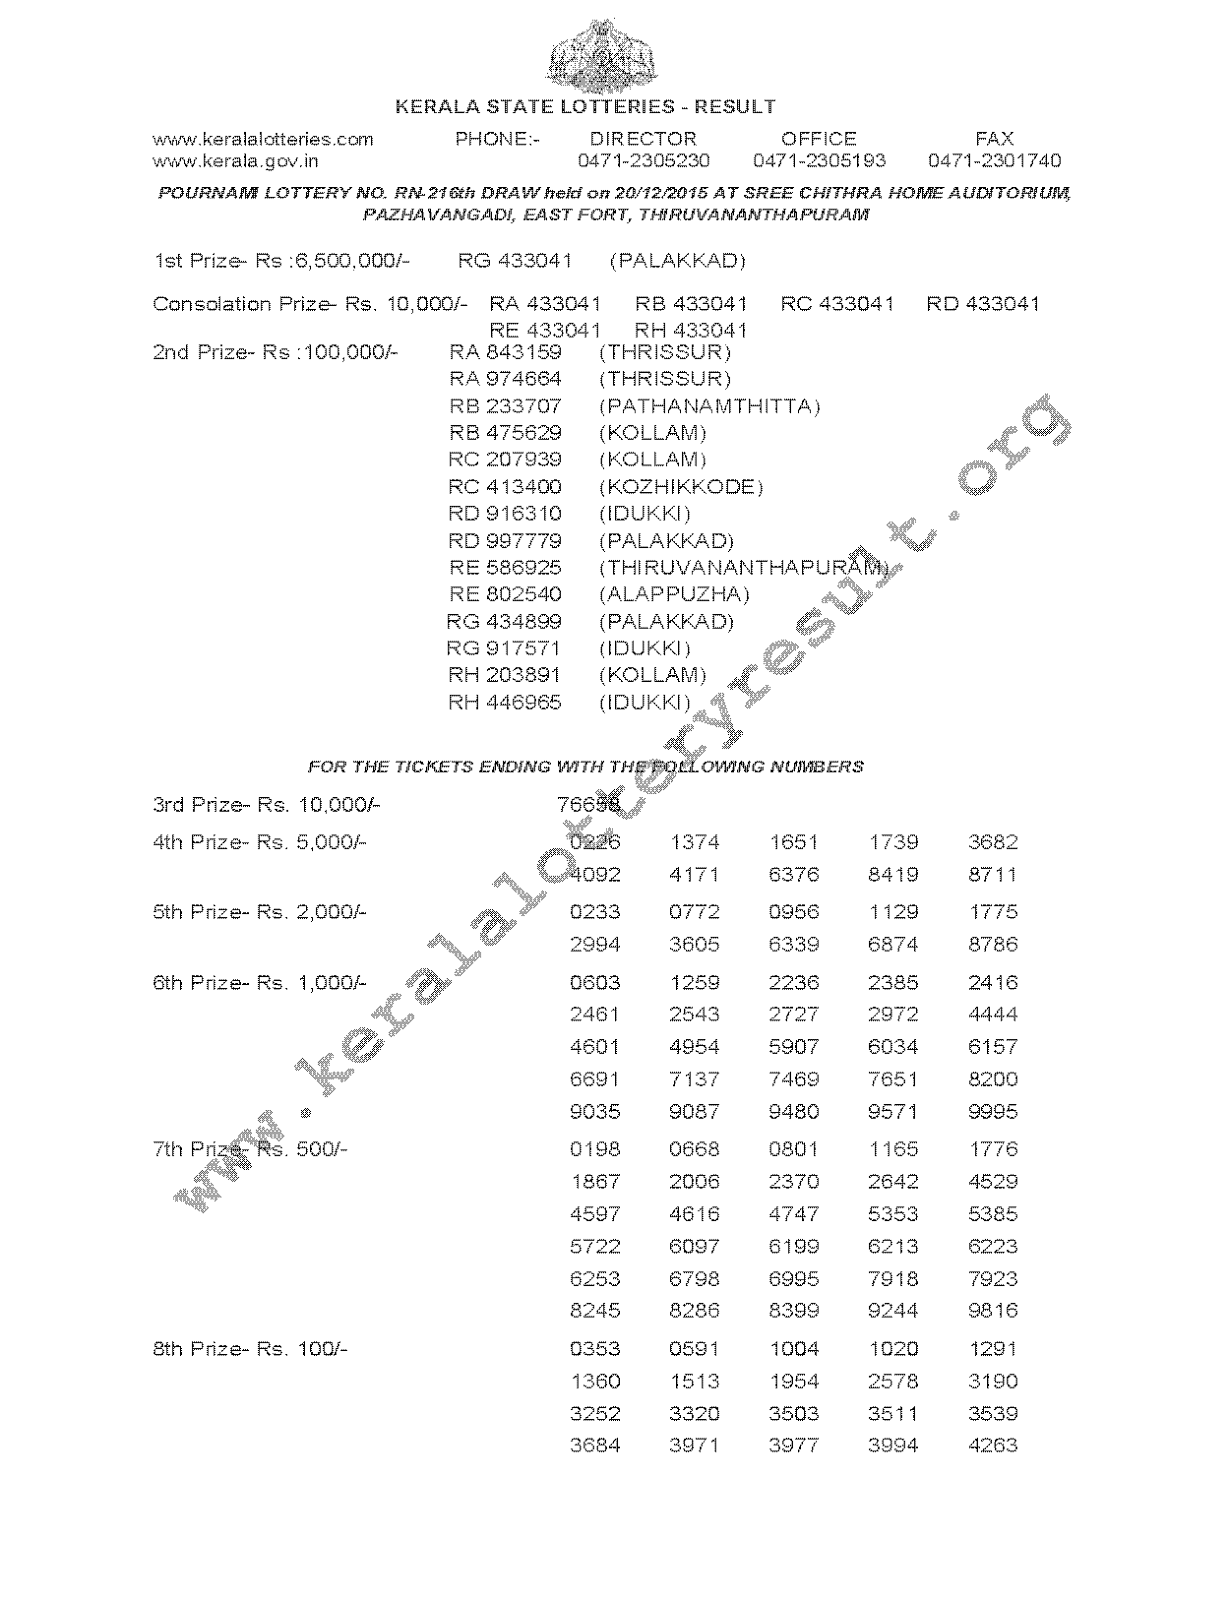 POURNAMI Lottery RN 216 Result 20-12-2015